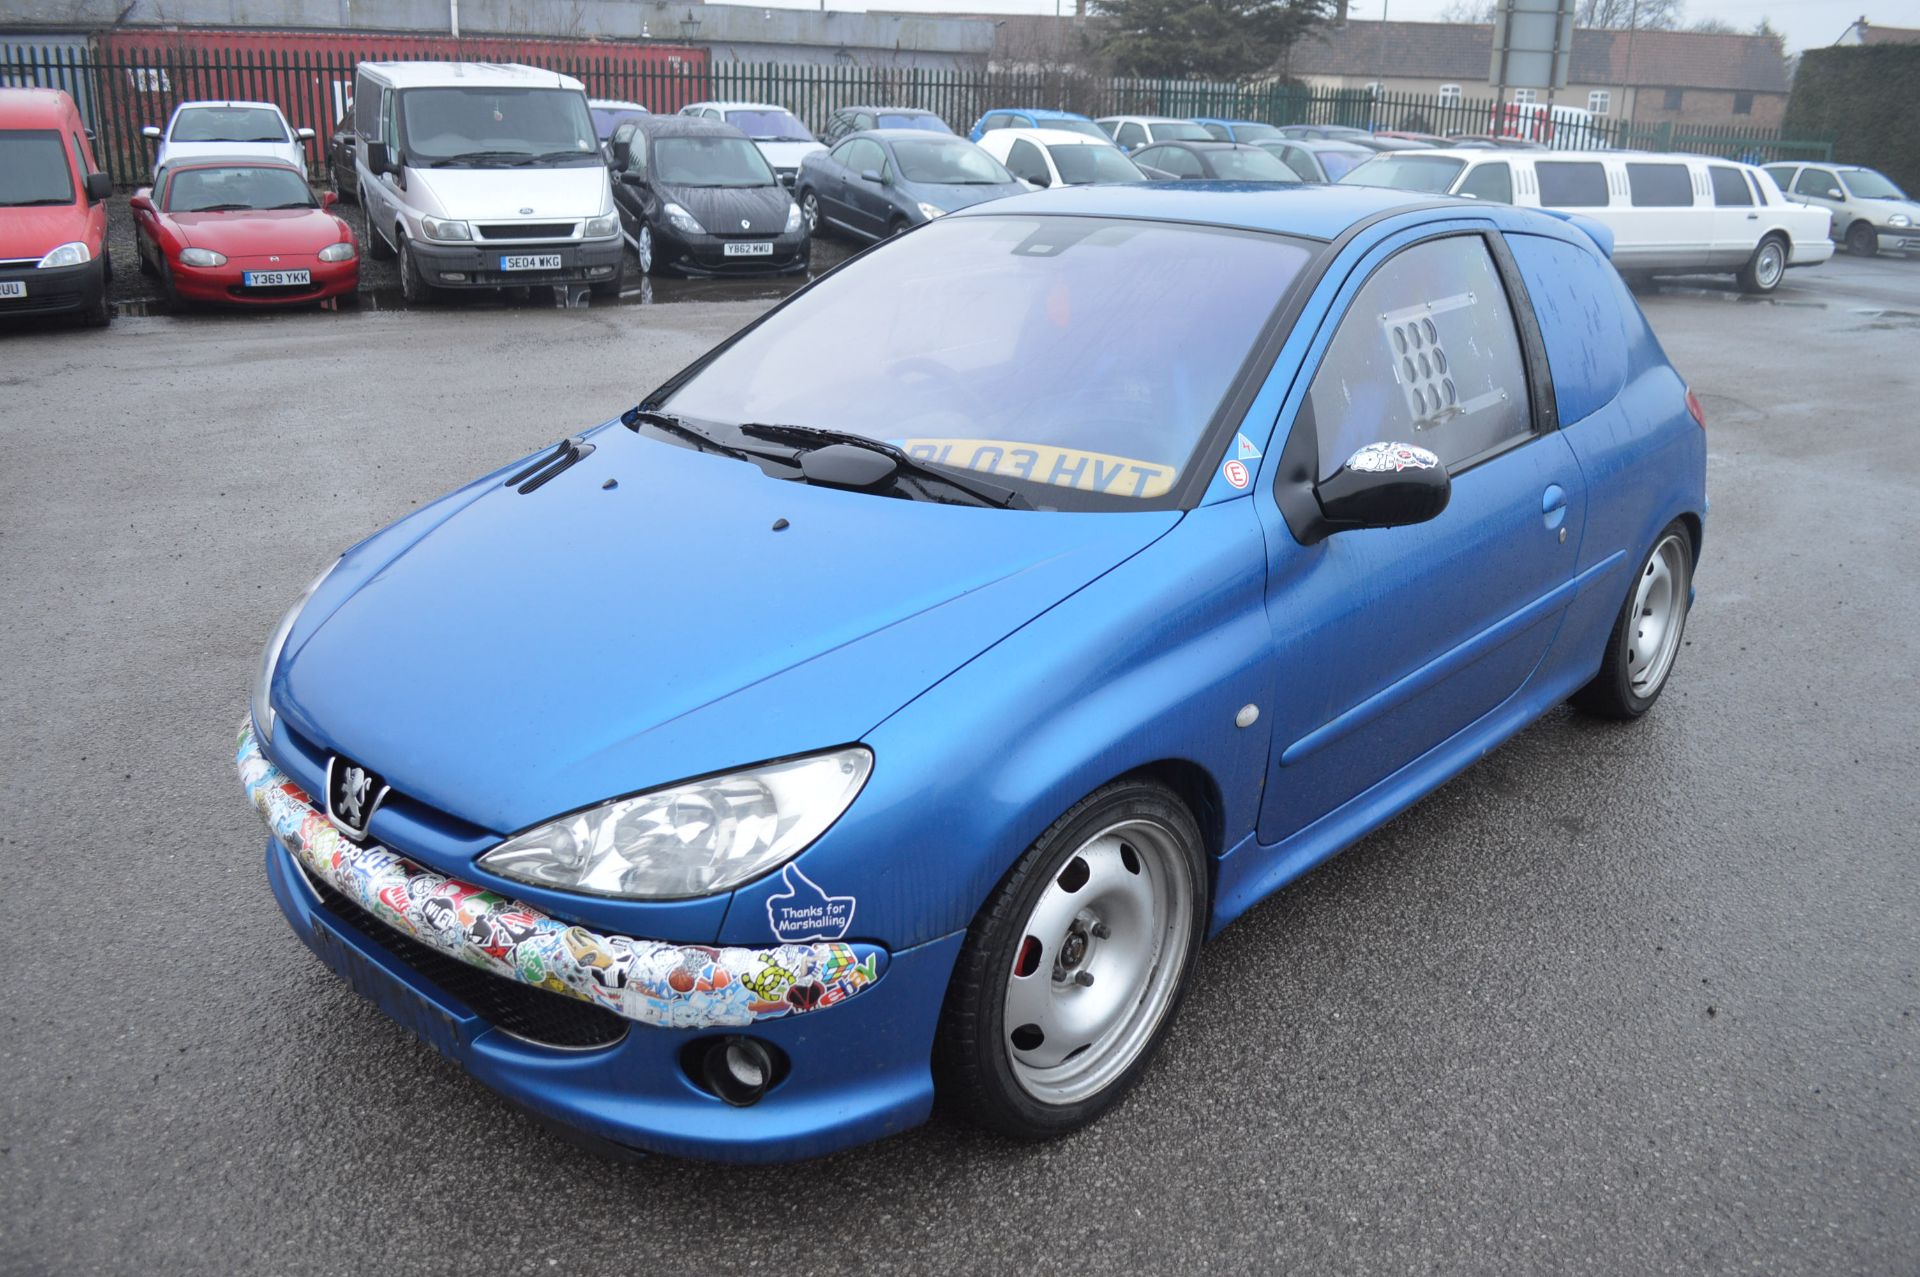 2003/03 REG PEUGEOT 206 GTI 180HP FAST TRACK DAY CAR  HAS THE 'VAN' PANELS FITTED INSTEAD OF REAR - Image 3 of 15